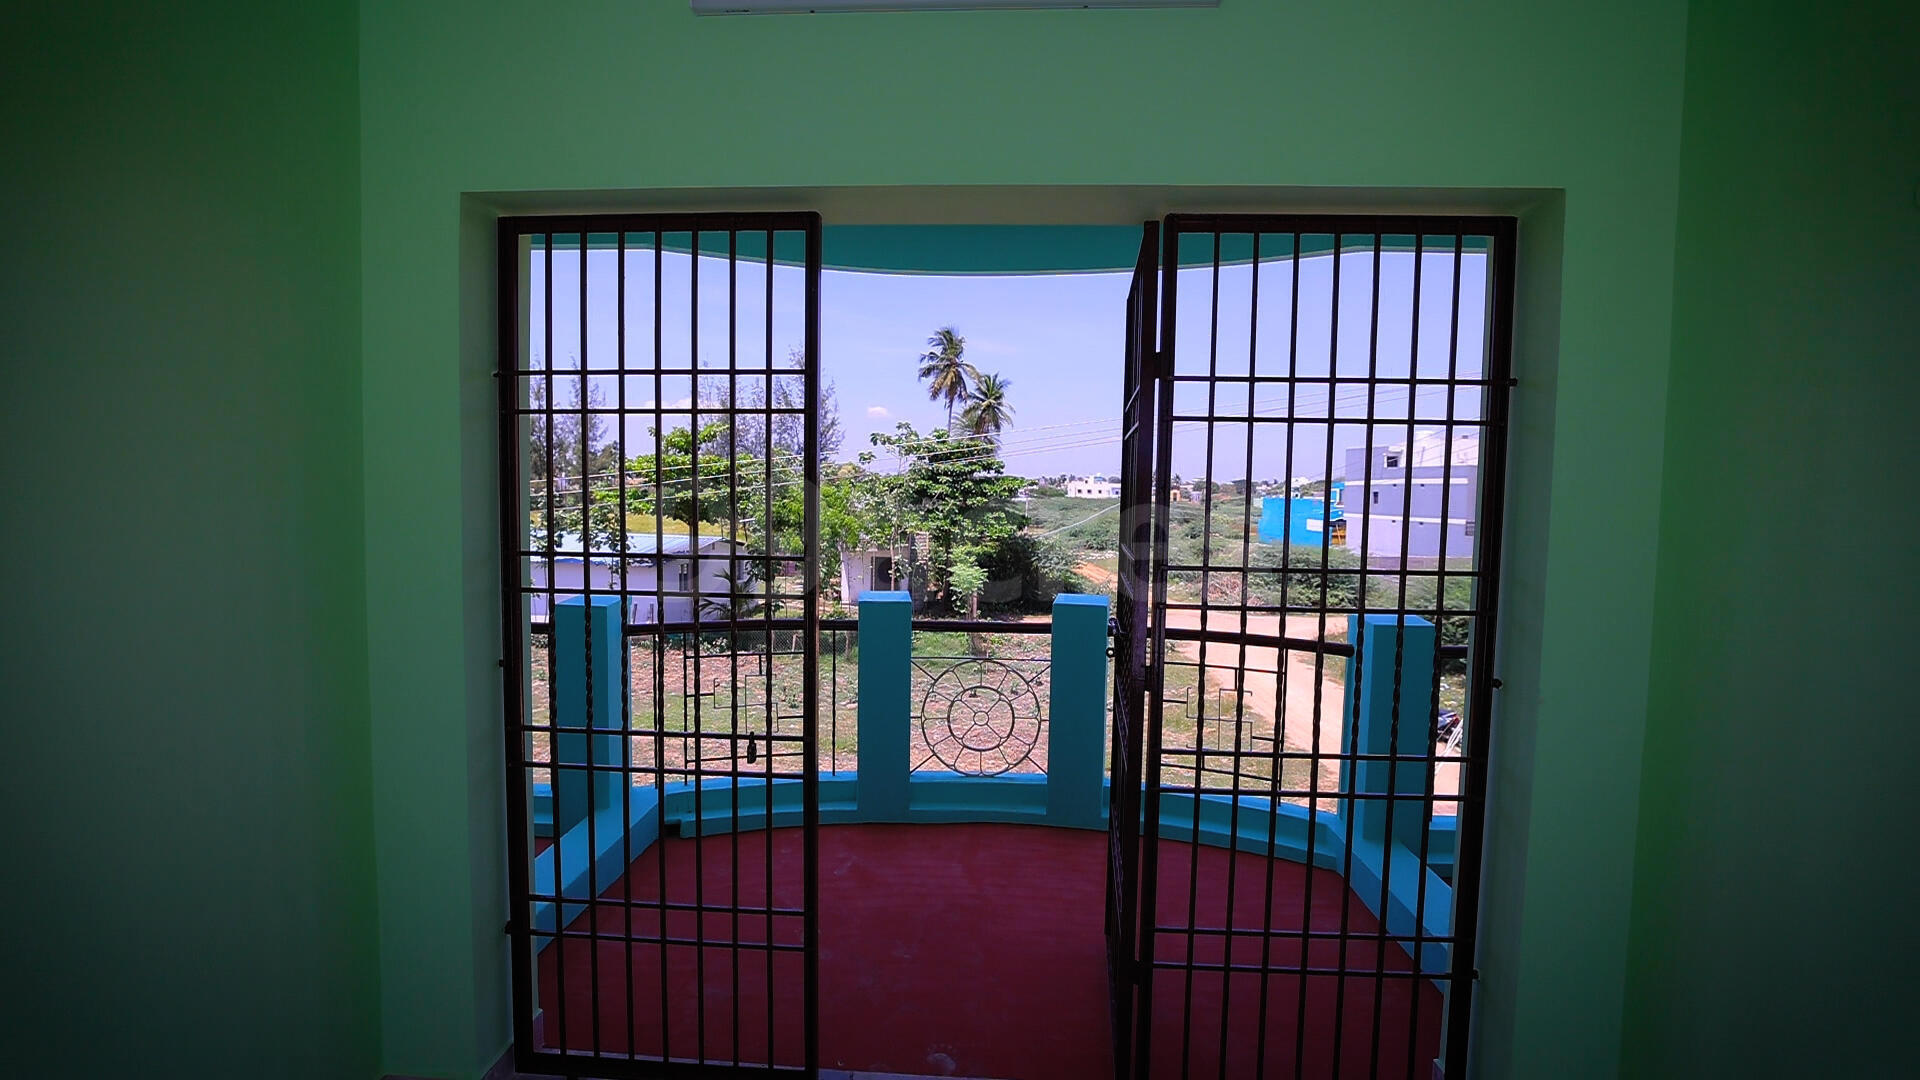 7988-for-sale-3BHK-Residential-Independent-House-Rs-8500000-in-Villianur-Villianur-Puducherry